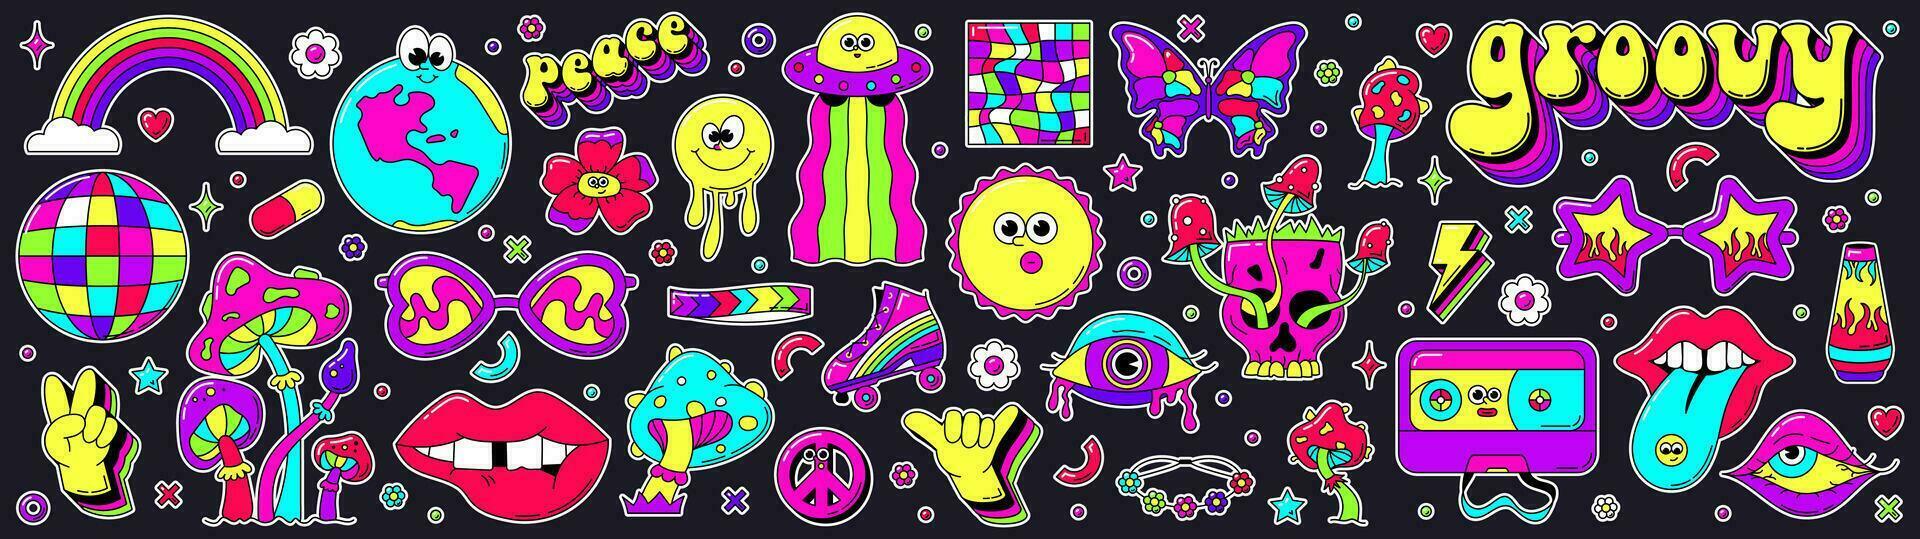 Neon colored objects. vector